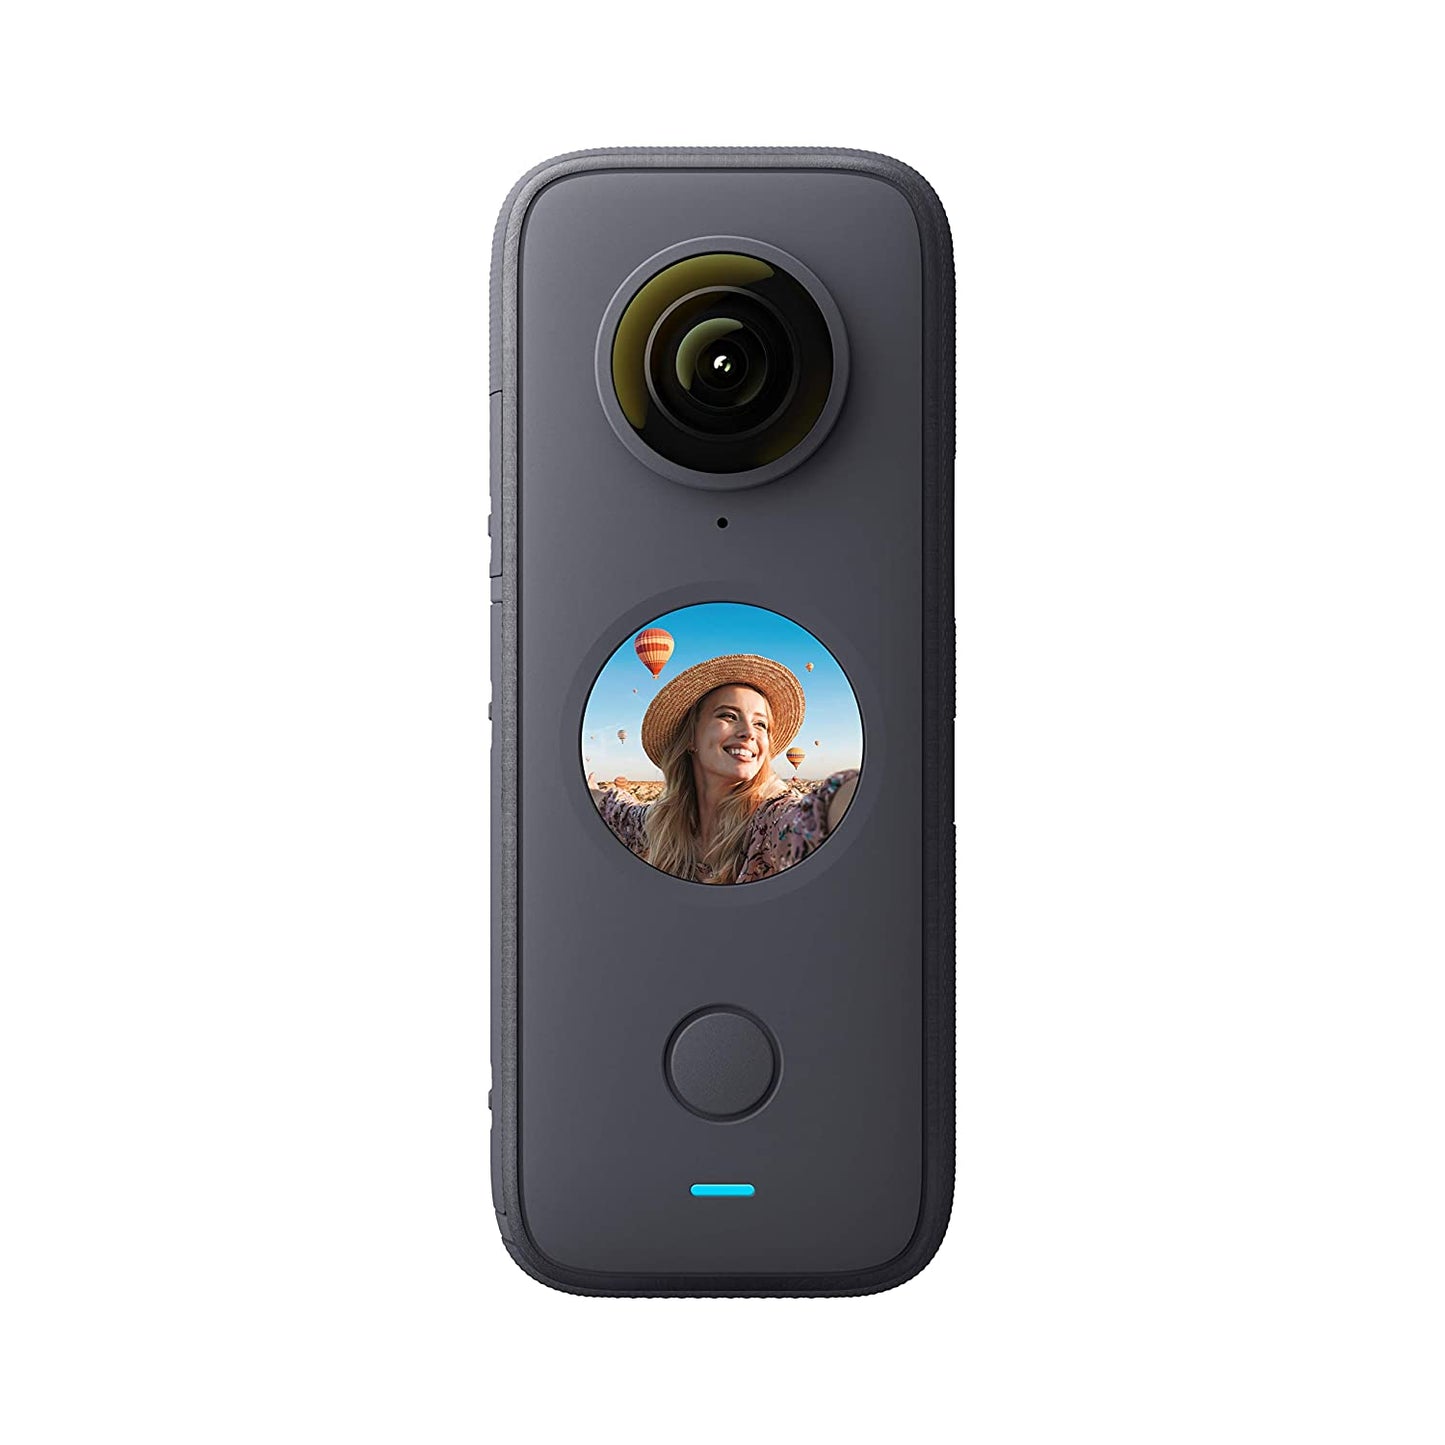 Insta360 ONE X2 Action Camera|5.7k 360 Capture| Steady Cam Mode| FlowState Stabilization| Ultra Bright Screen| Waterproof to 10m|4-Mic 360 Audio |Time Shift | Voice Control |